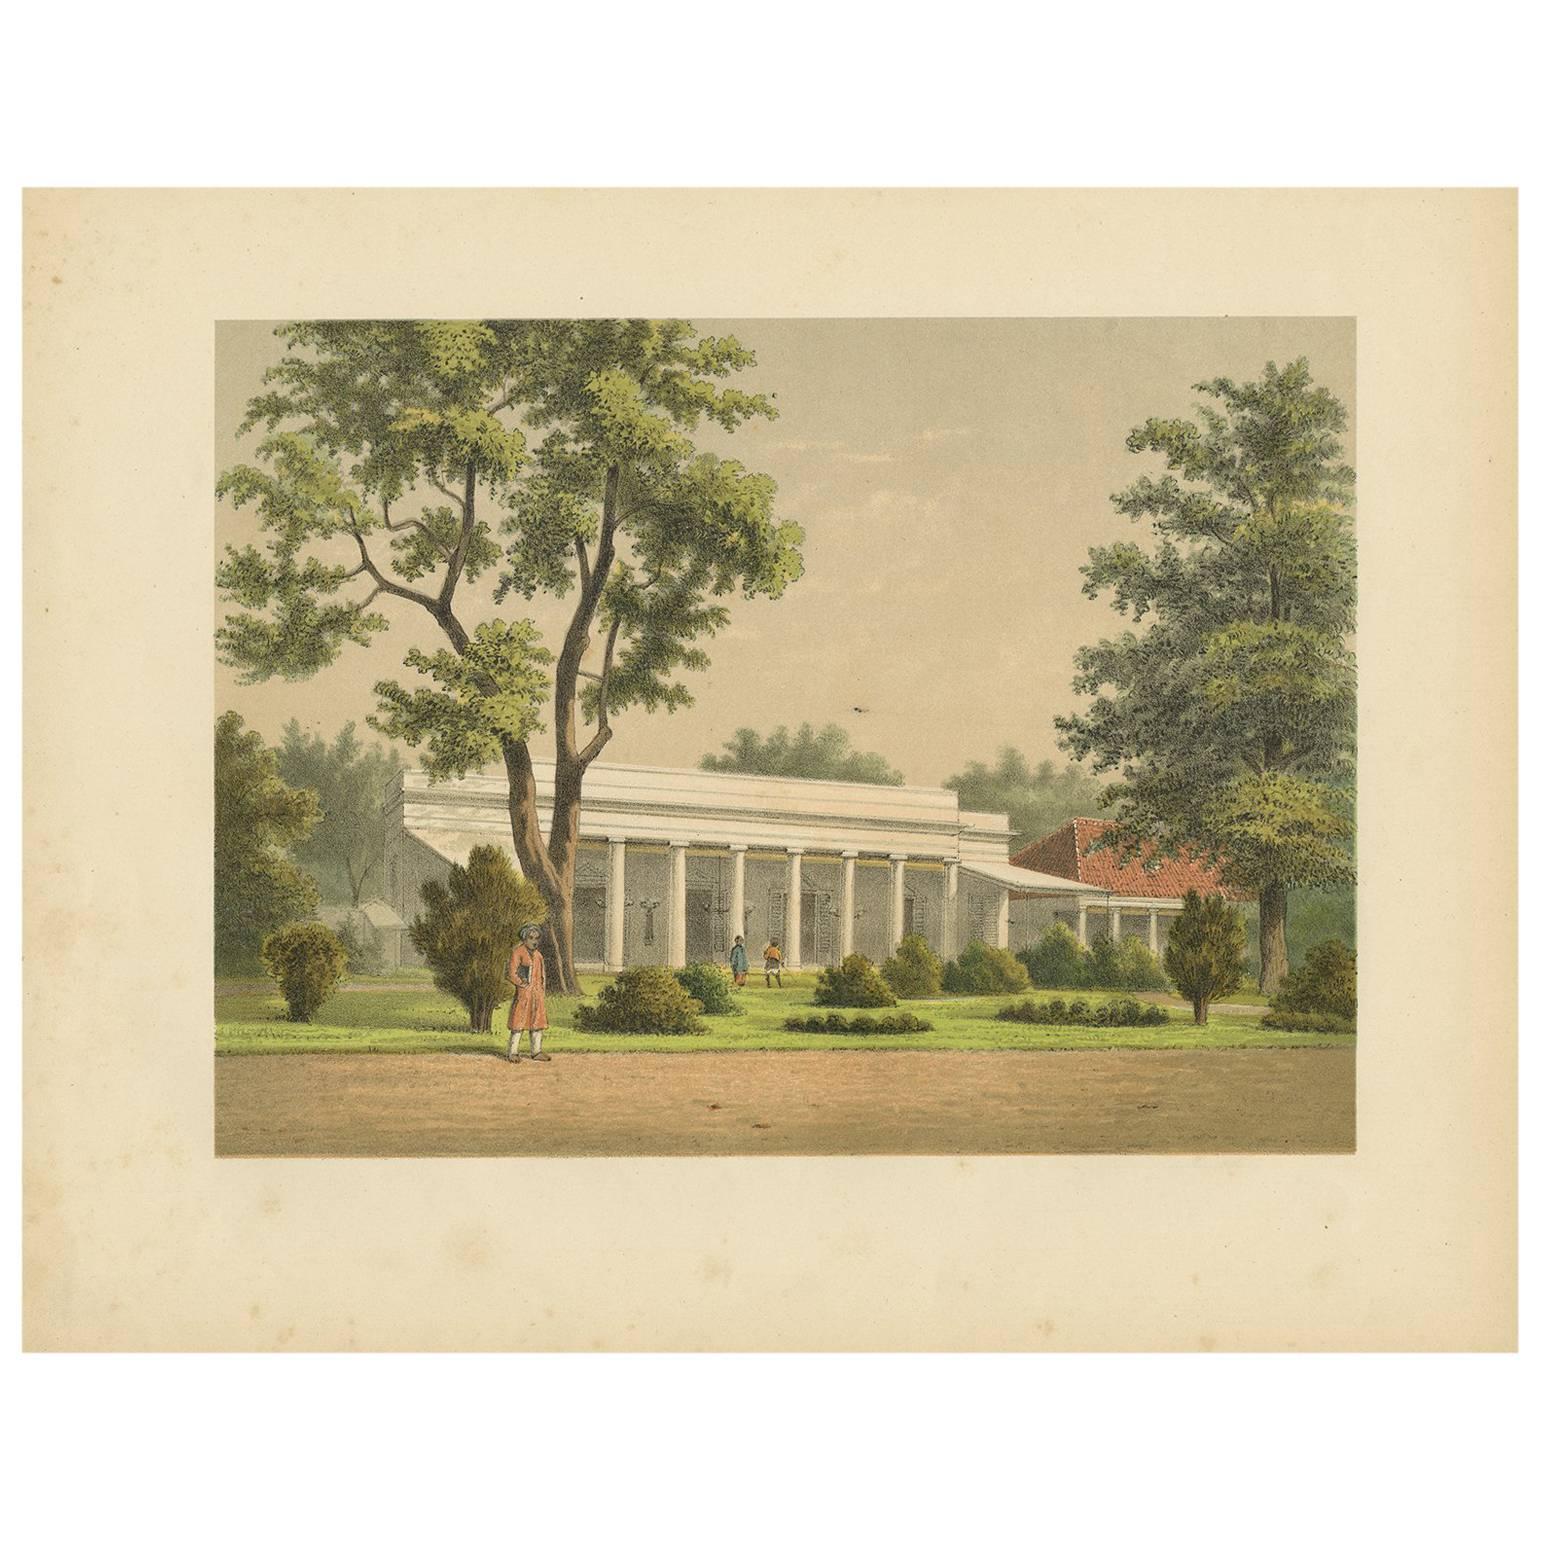 Antique Print of a Colonial Residence in Batavia by M.T.H. Perelaer, 1888